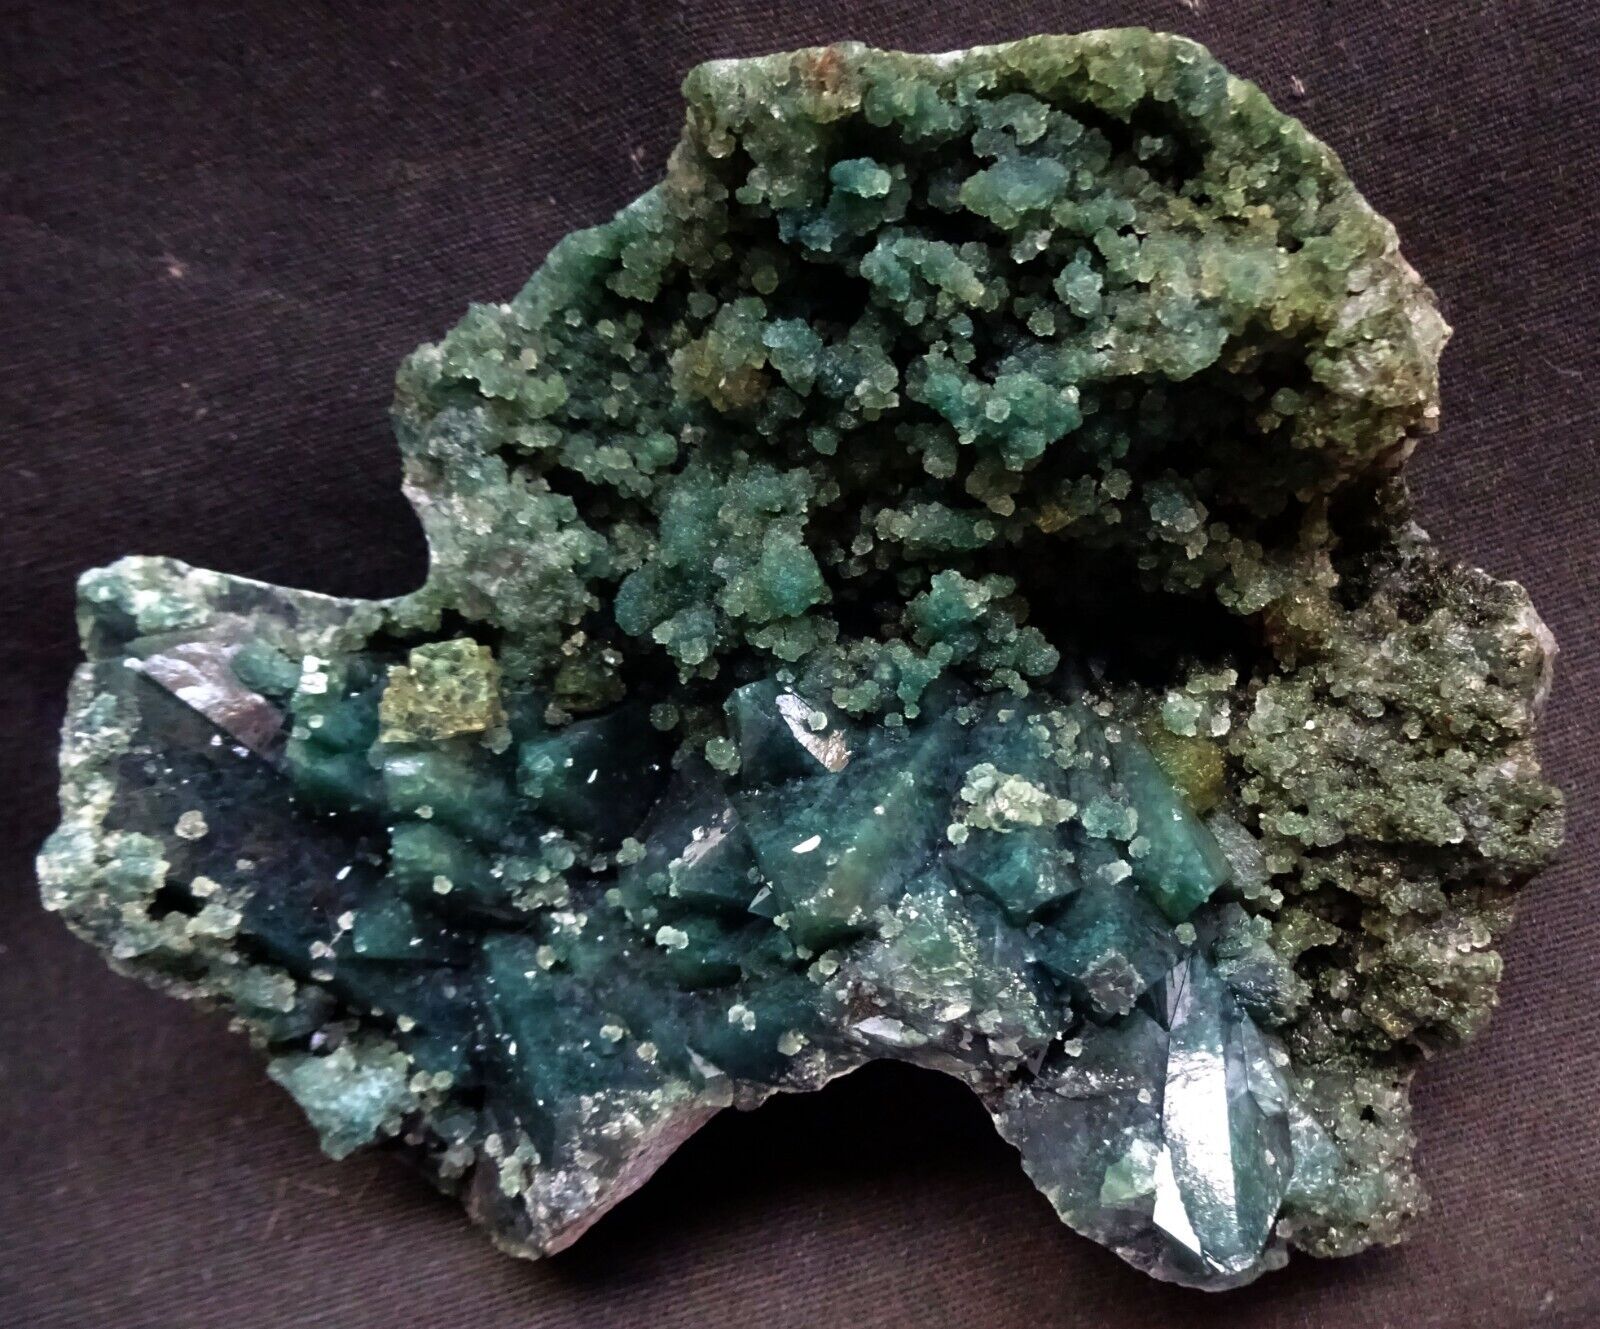 STUNNING MARSHY GREENBROWND APOPHYLLITE CRYSTALS ON GREEN CORAL CHALCEDONY BASE